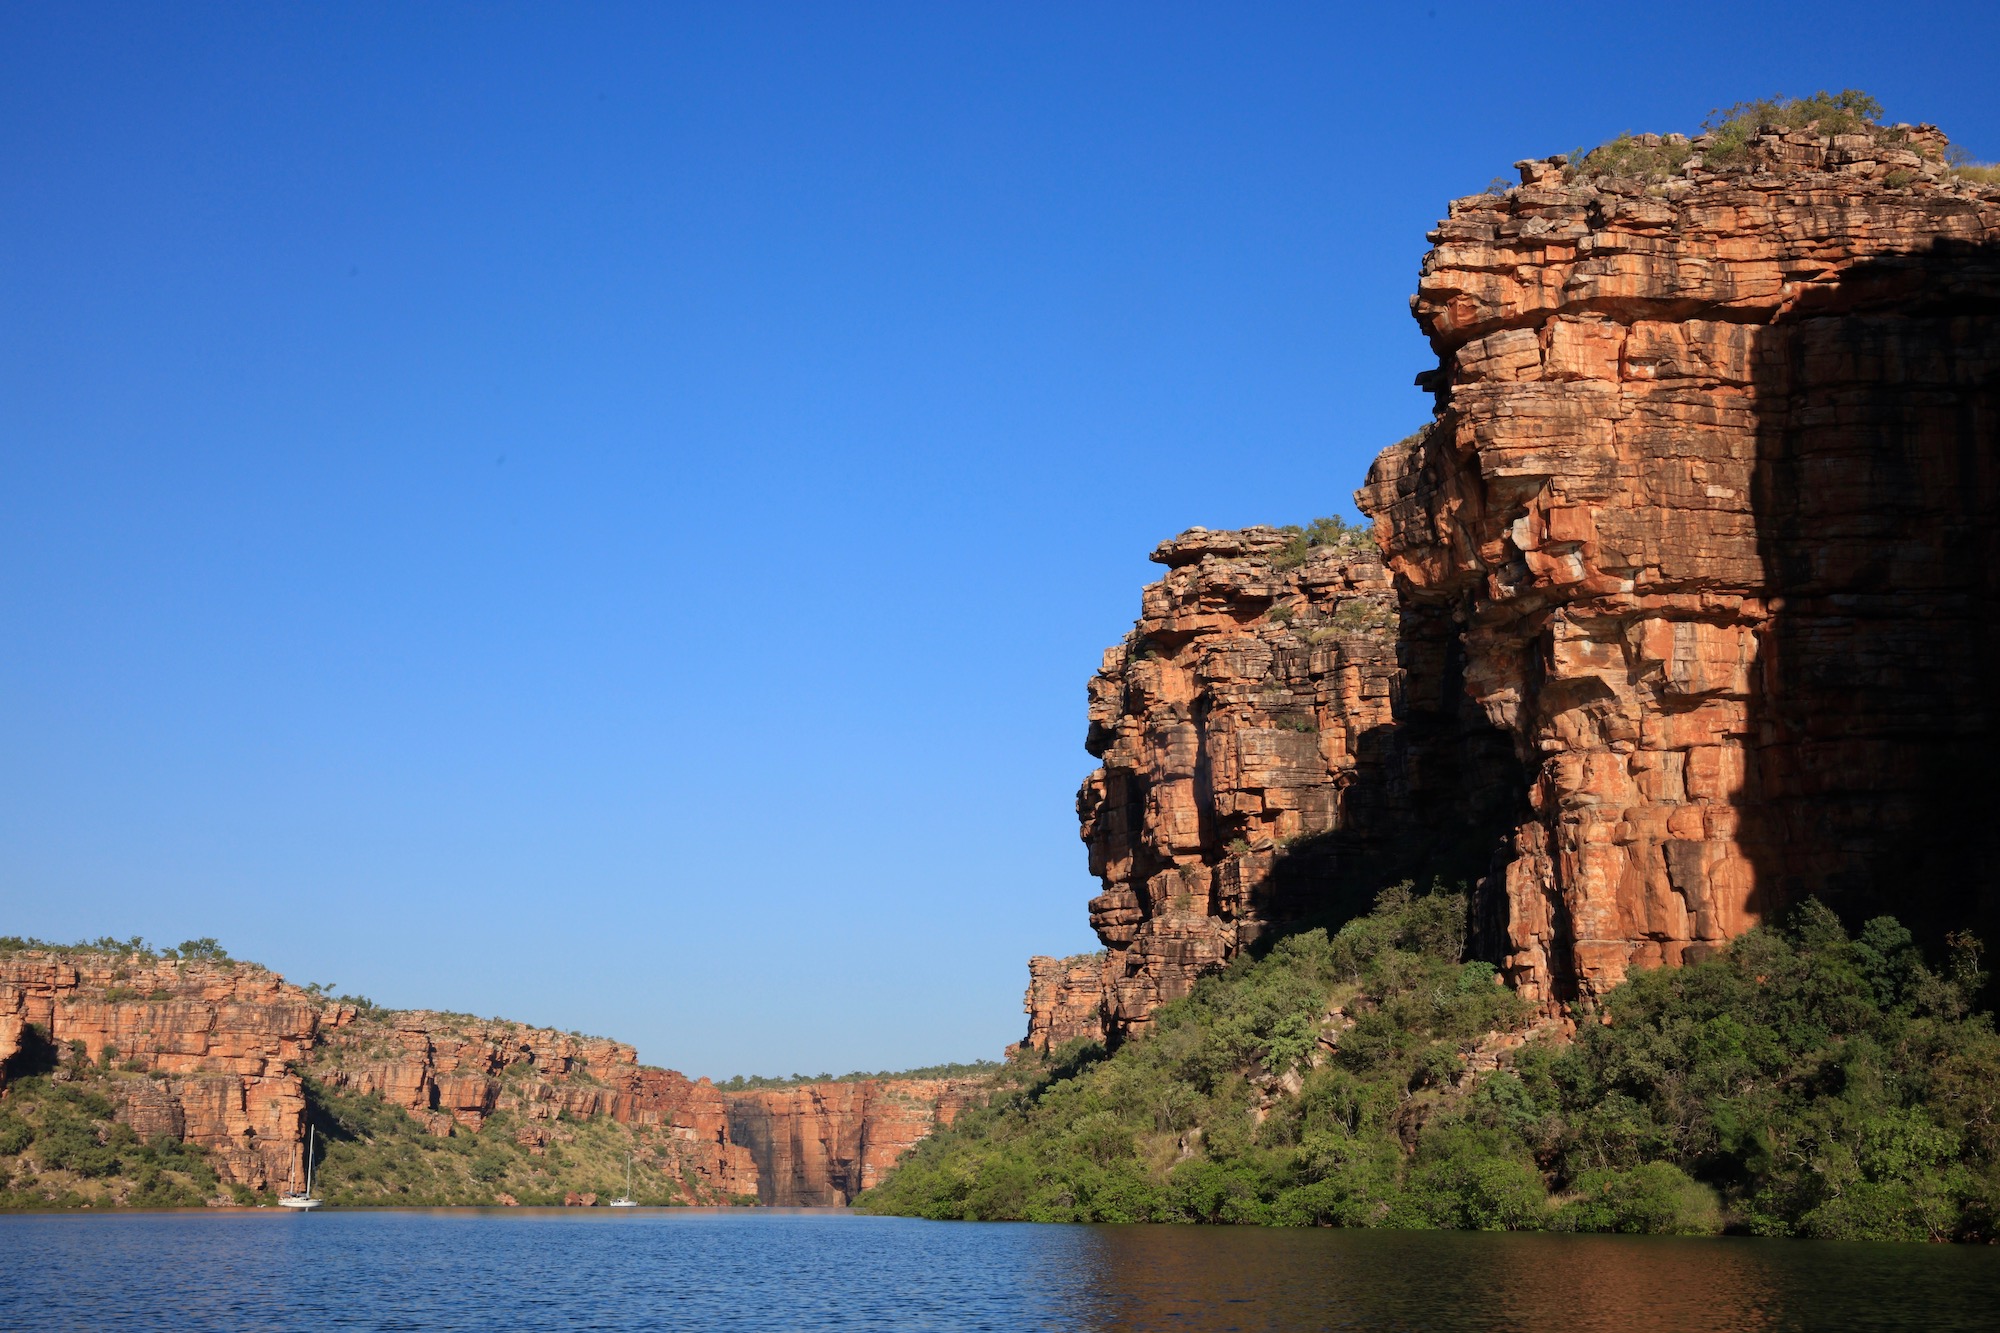 Colours of the Kimberley